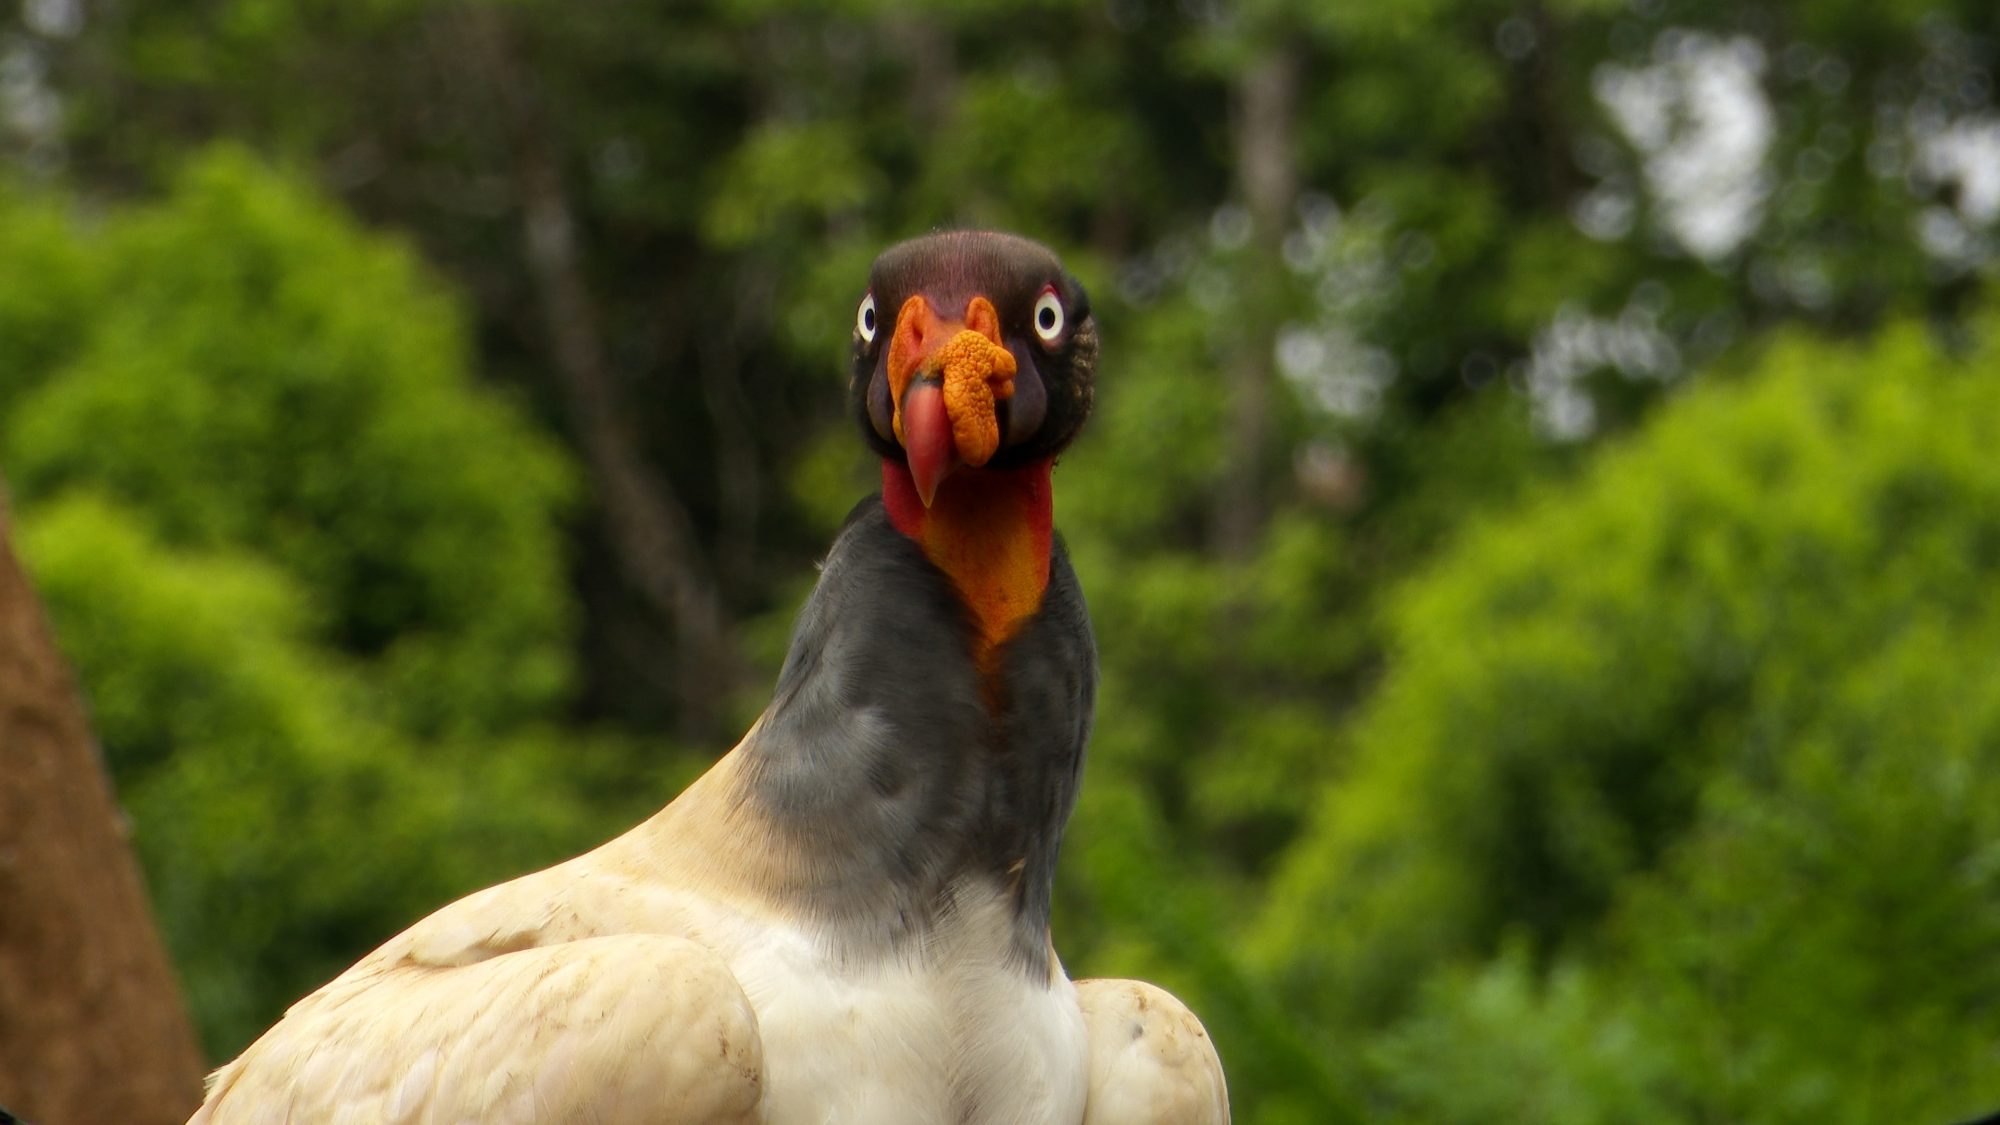 King Vultures – Costa Rica 2019